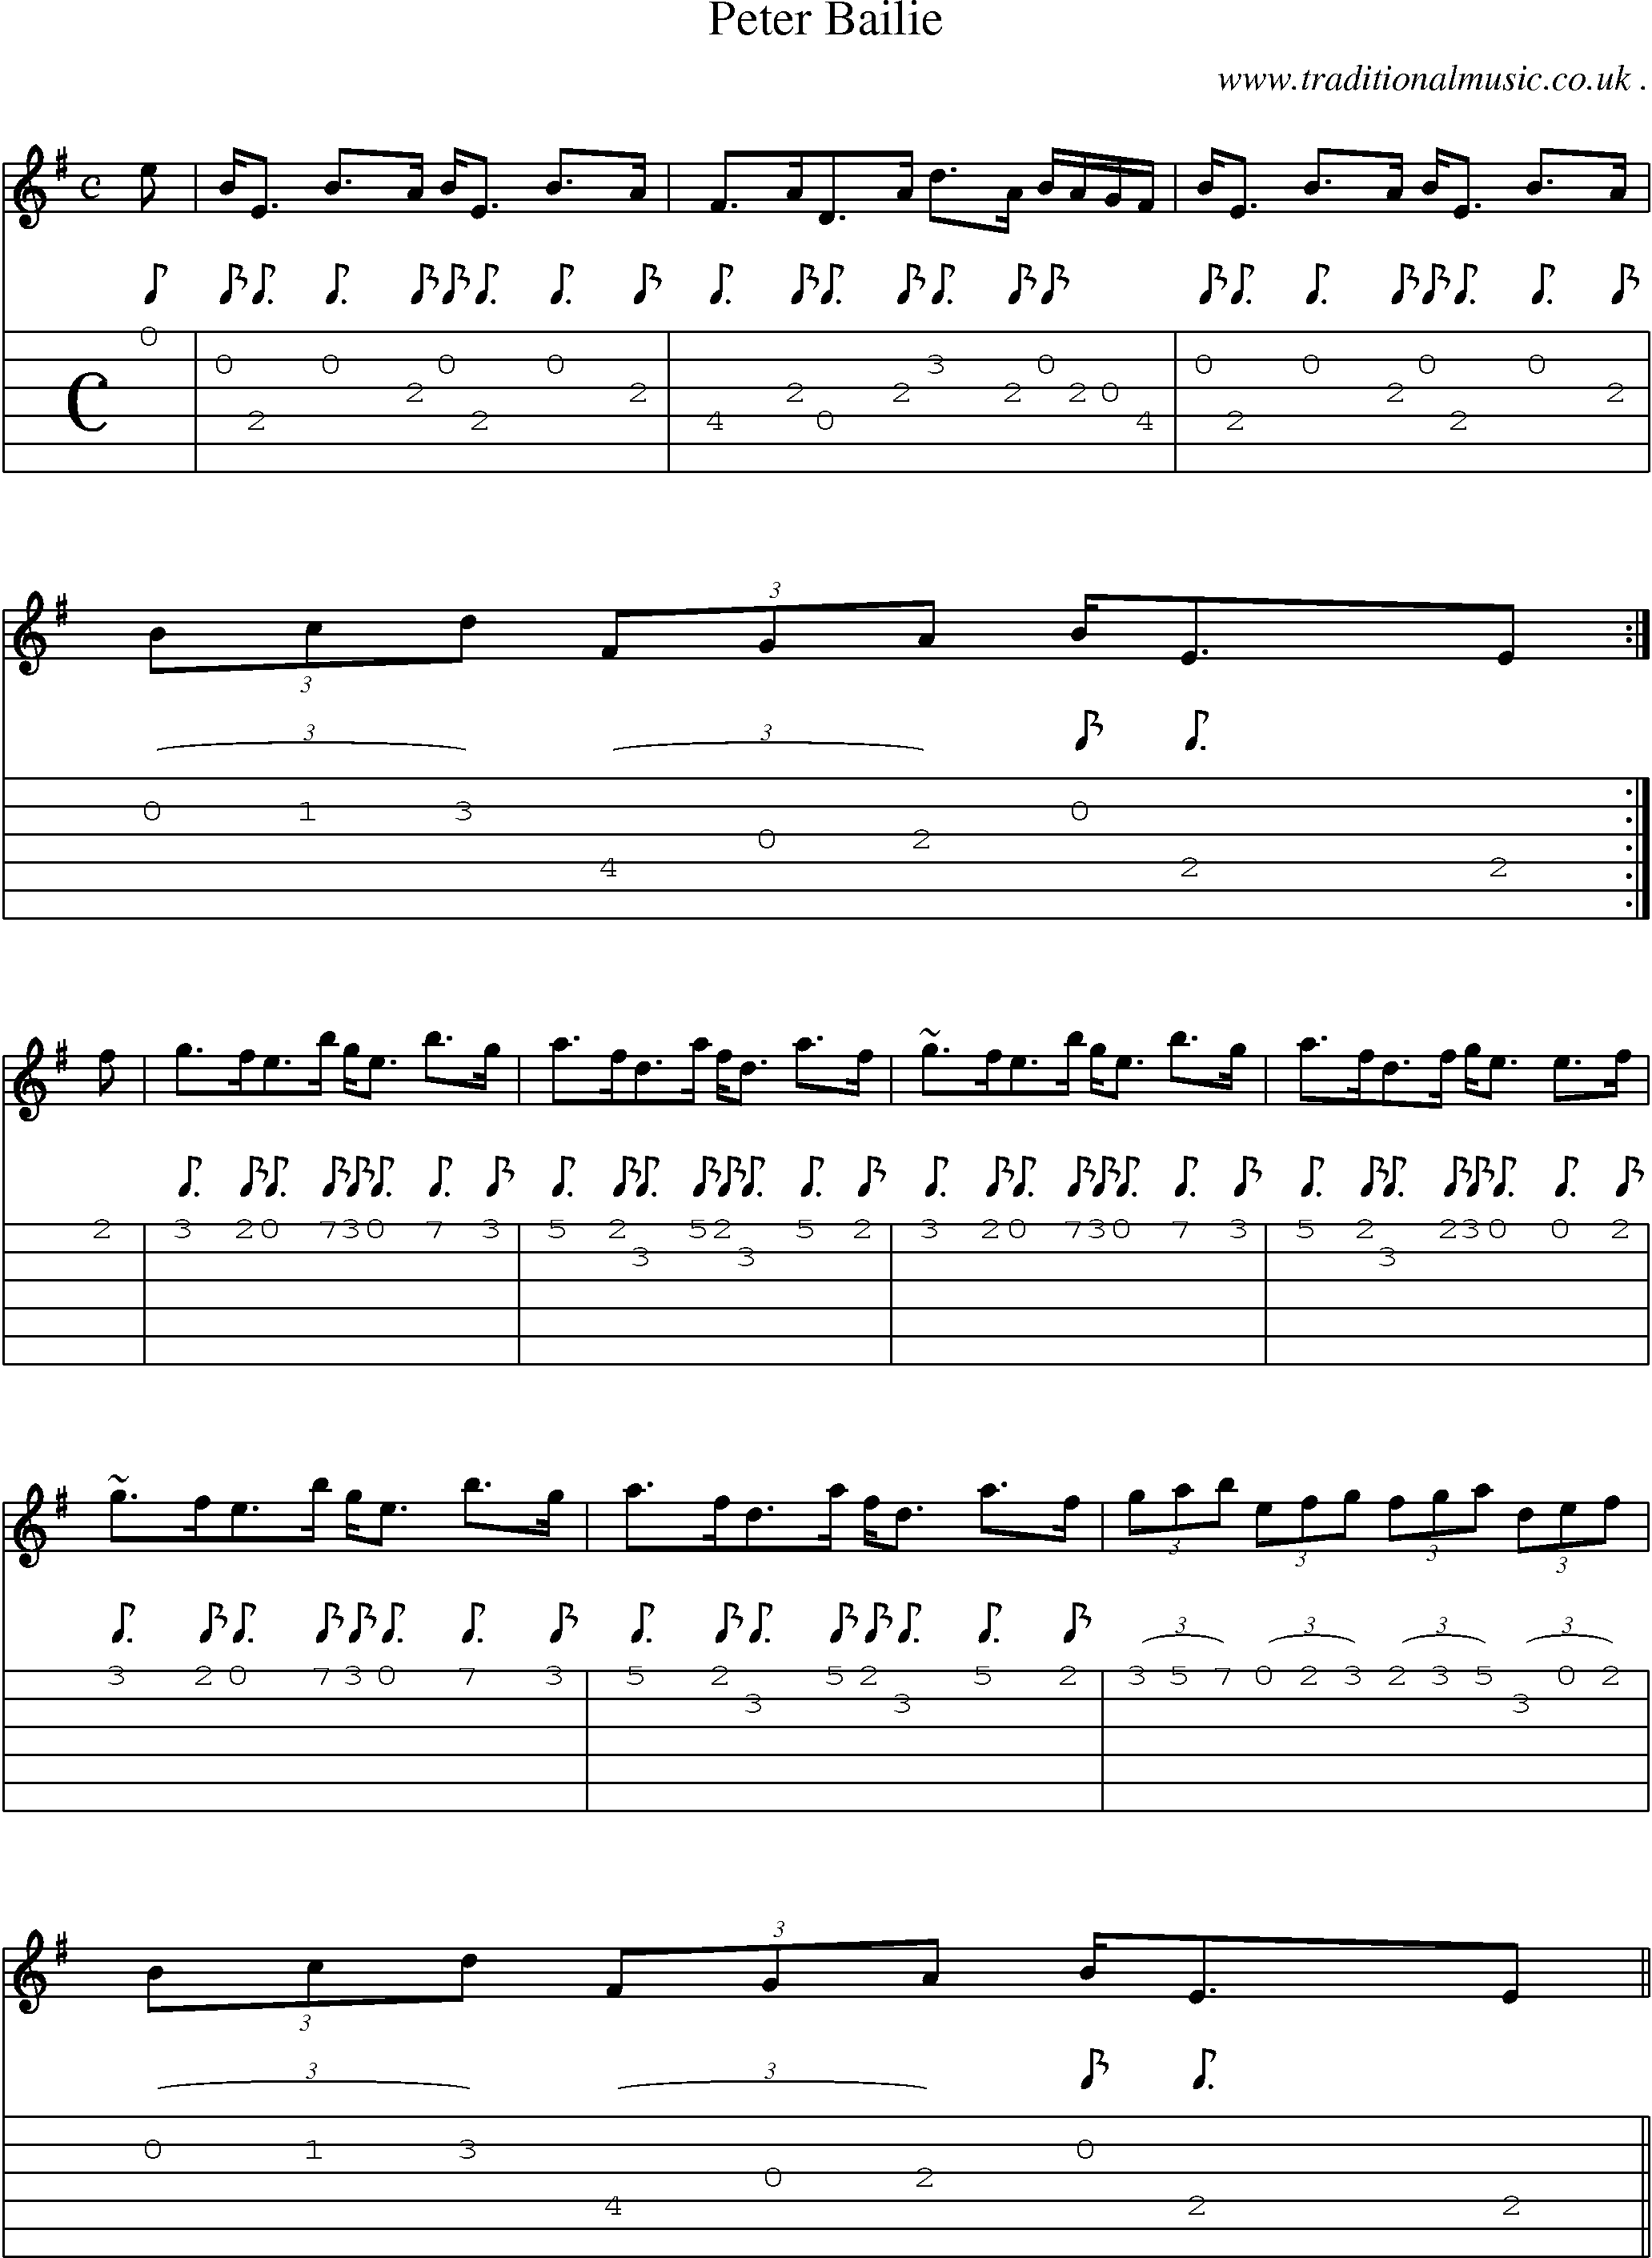 Sheet-music  score, Chords and Guitar Tabs for Peter Bailie